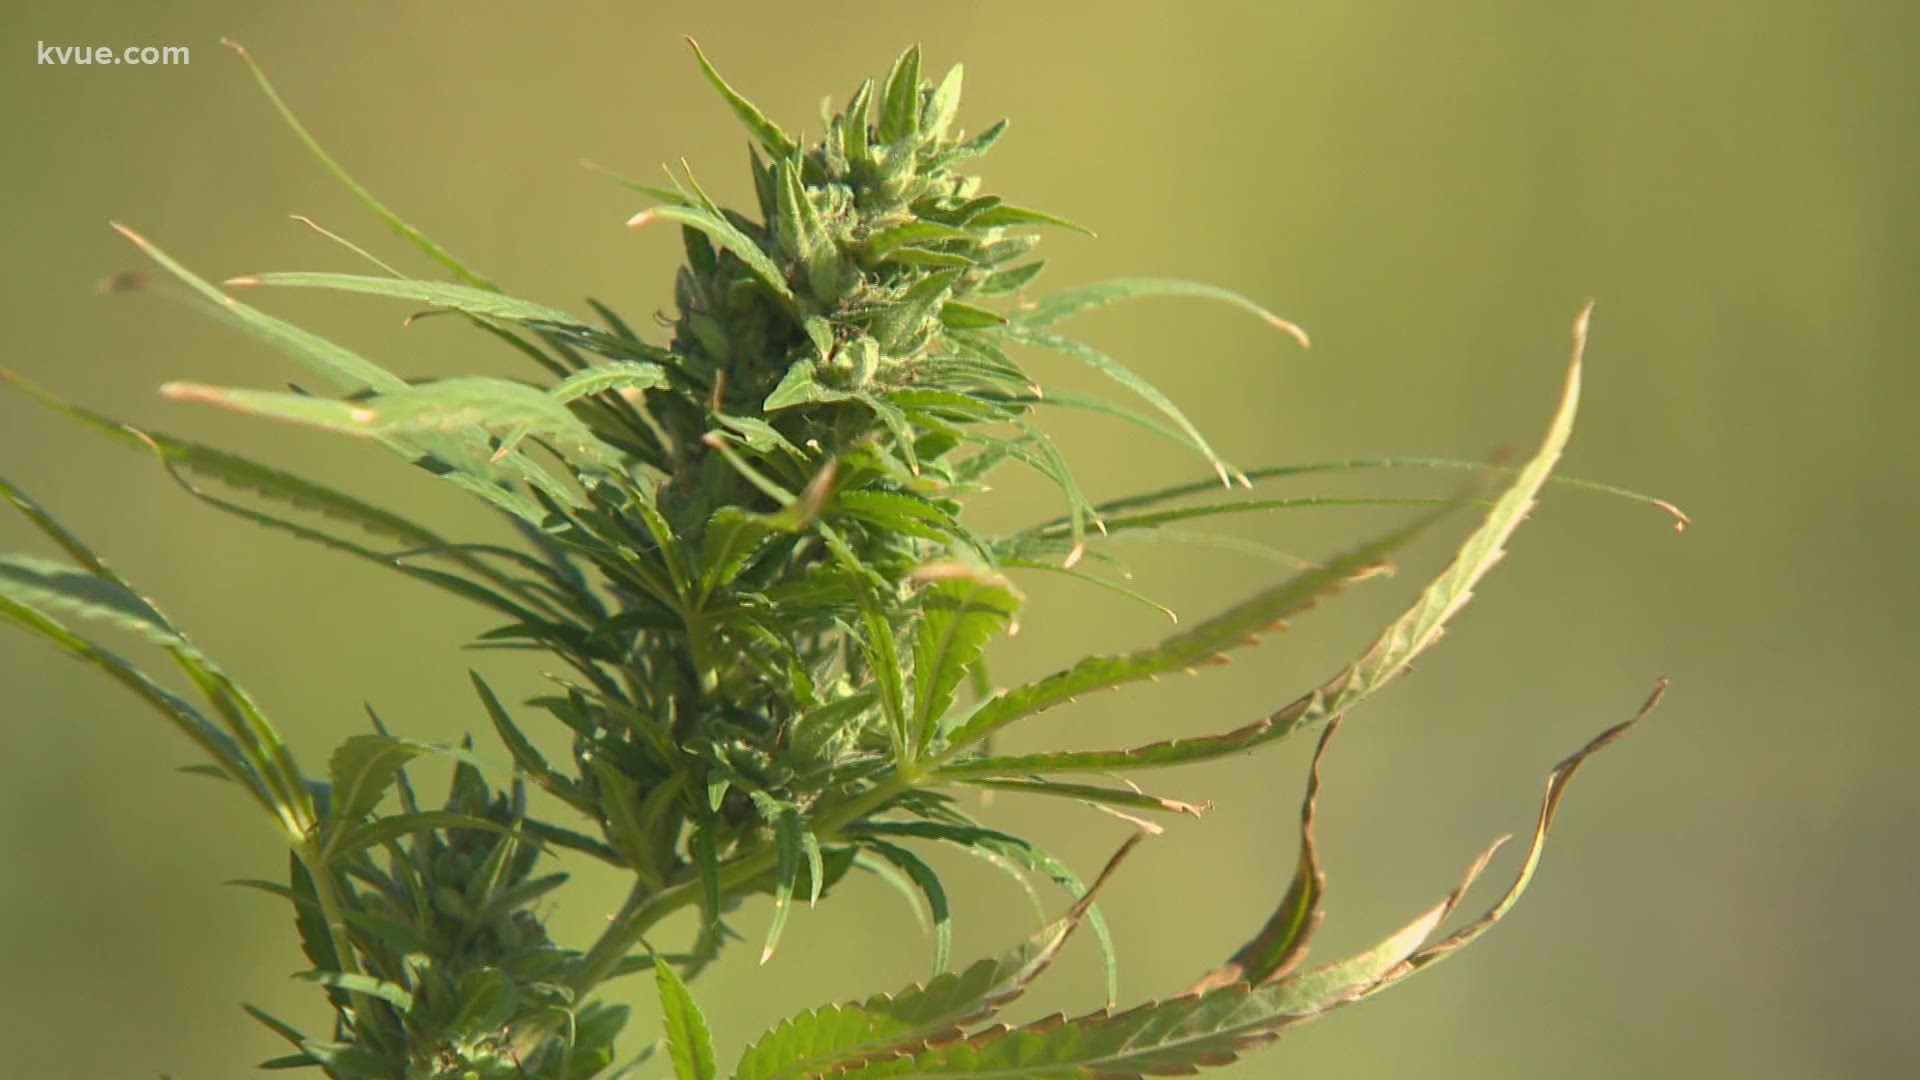 The first legal hemp harvest in Central Texas in years is happening. Hemp is a relative of marijuana but doesn't have enough THC to get people high.